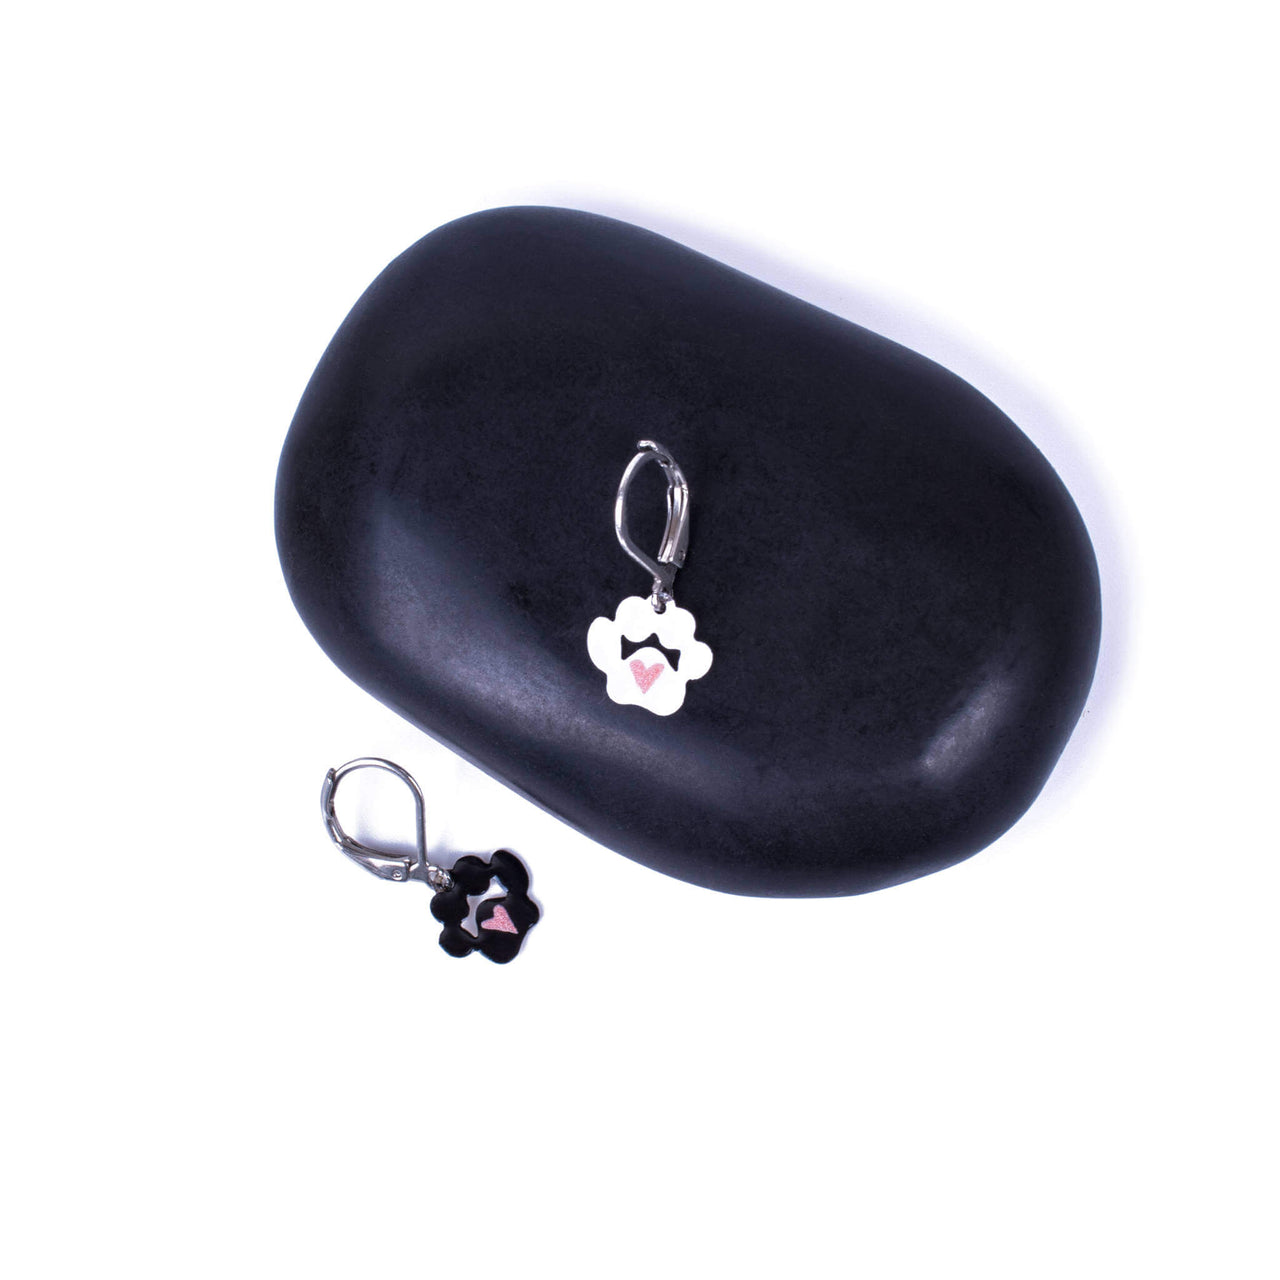 Mismatched Black and White Dog Paw Leverback Earrings